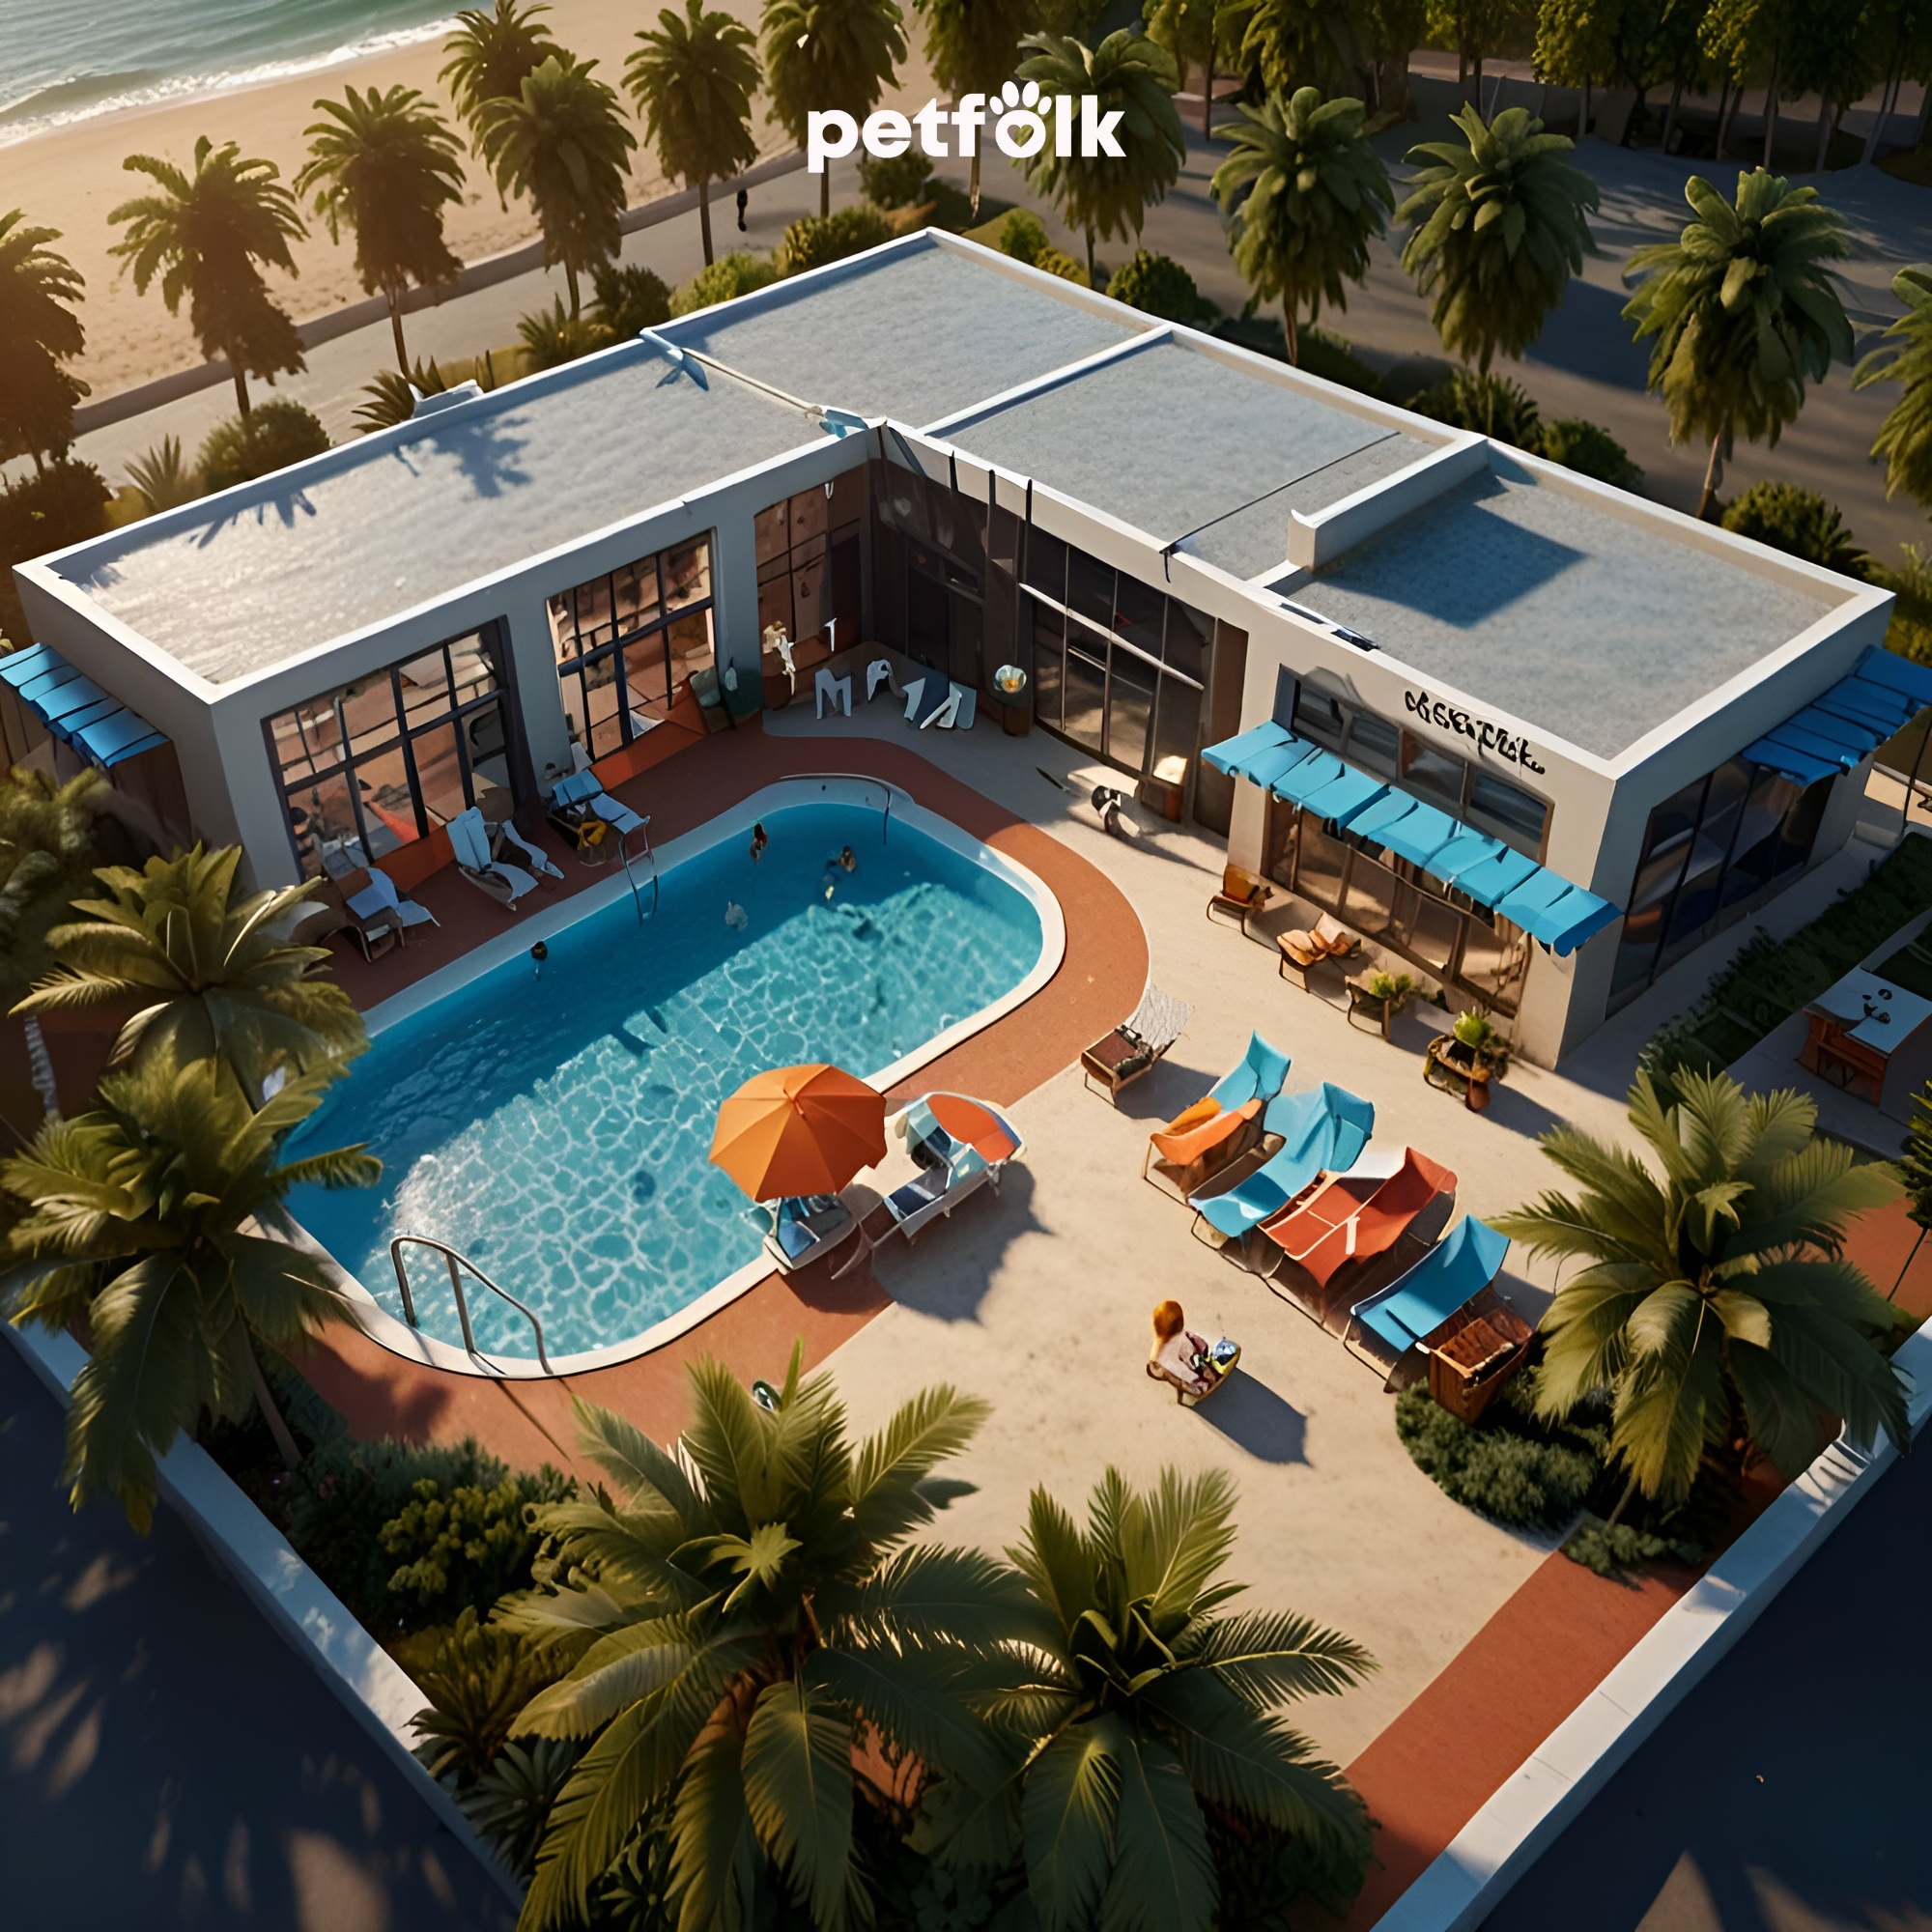 Aerial view of a modern pet resort named Petfolk located by the beach. The resort features a large swimming pool with lounge chairs and umbrellas around it, surrounded by palm trees. The building has large glass windows and blue awnings, creating a relaxing and luxurious environment for pets. The beach and ocean are visible in the background, enhancing the tropical ambiance.